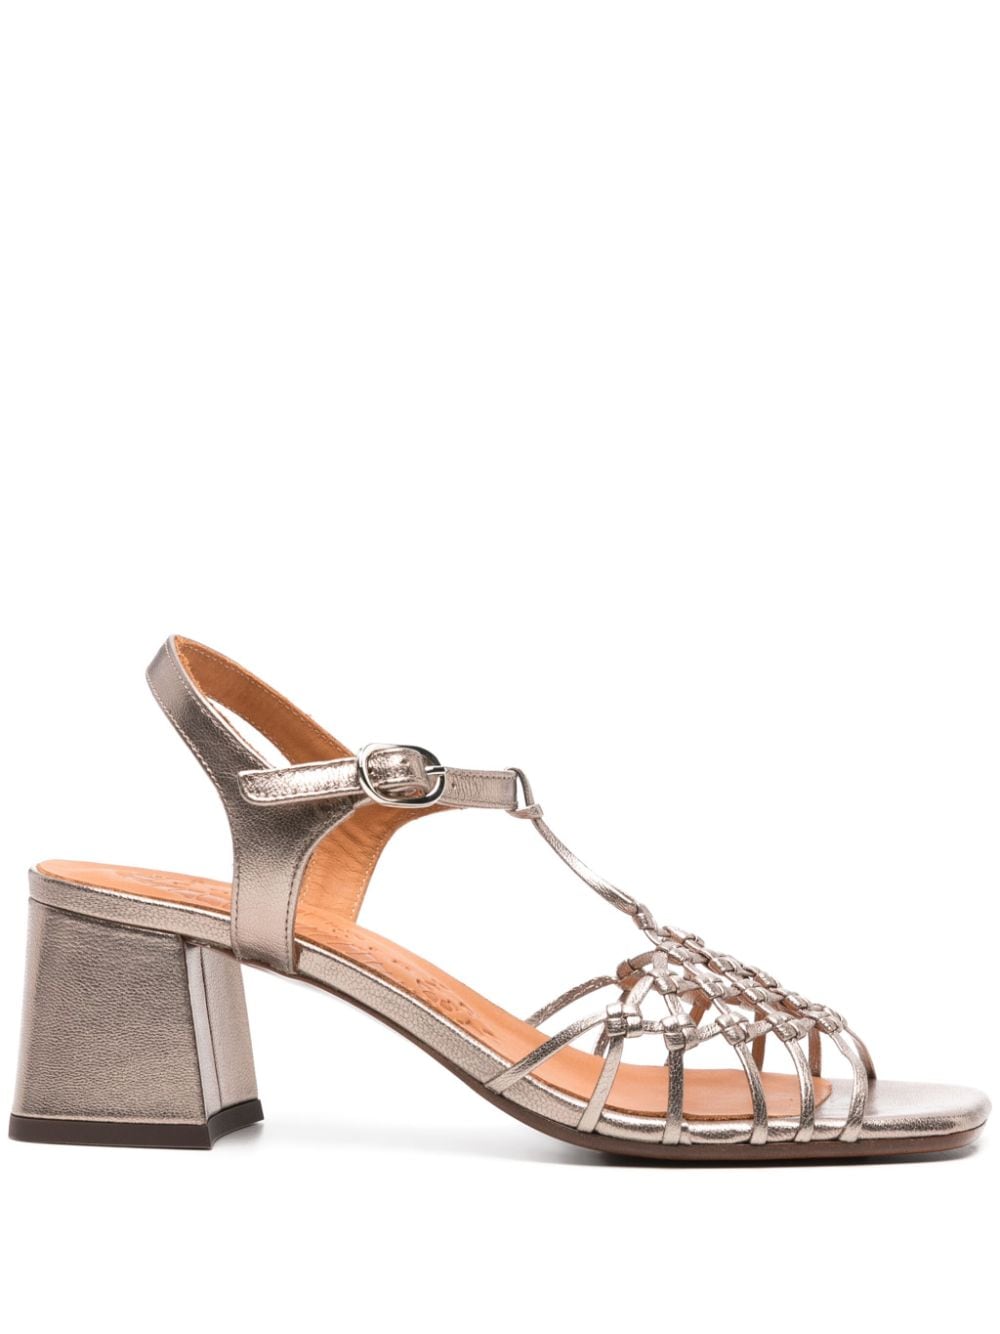 Chie Mihara Lantes 65mm Leather Sandals In Silver